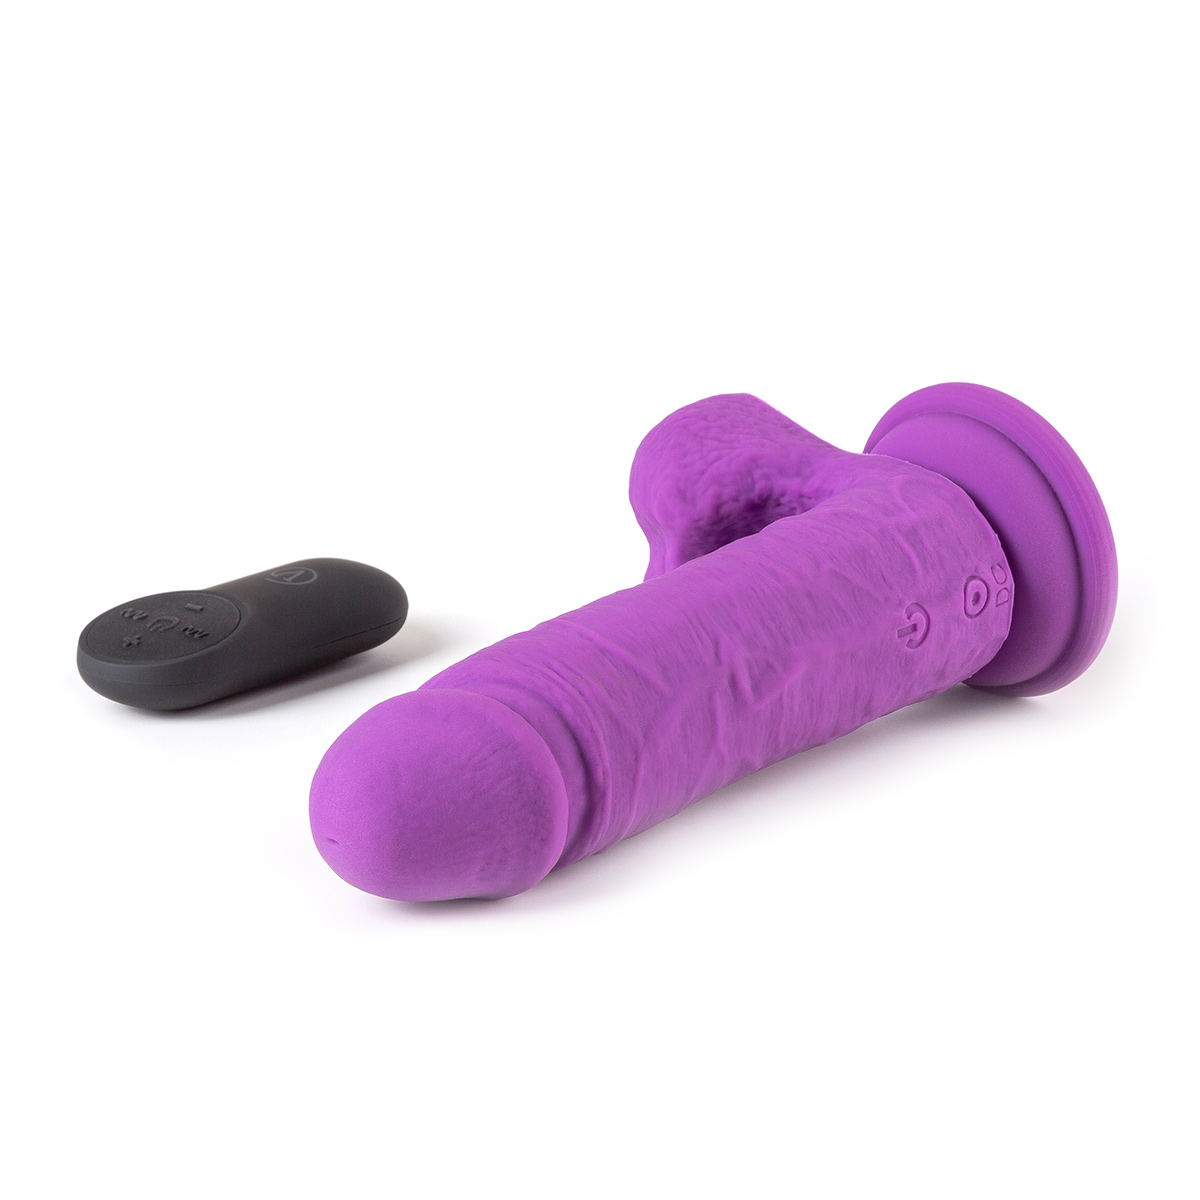 Vibrating-Realistic-with-Remote-R12-Purple-OPR-3090097-1